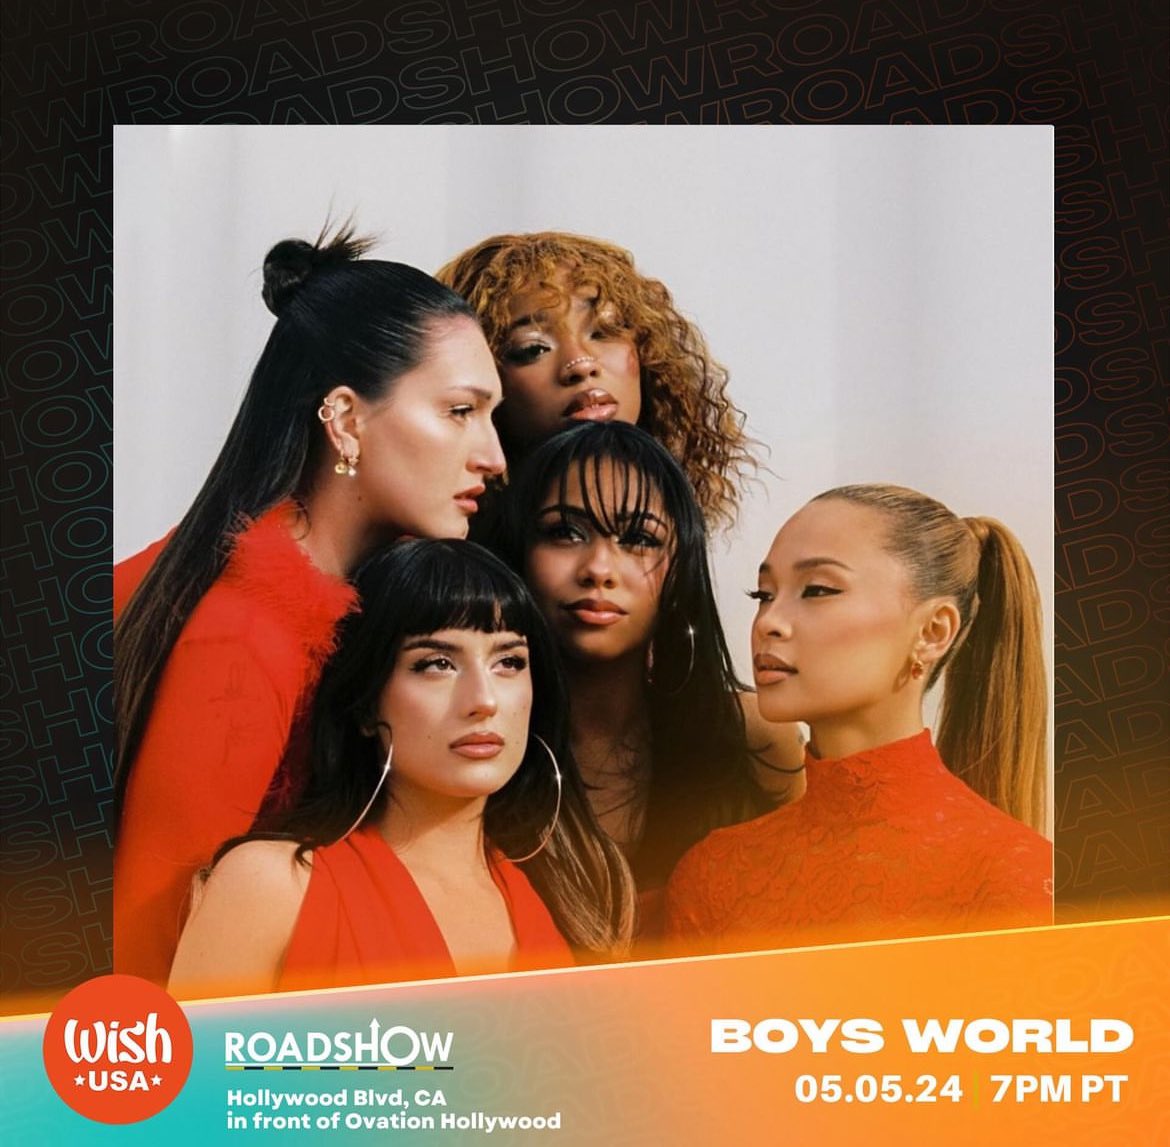 Boys world (@boysworld) will be performing live for @wishusaofficial this Sunday, in front of Ovation Hollywood at 7pm (PST) ! You don’t want to miss it 🌟 #Boysworldlive